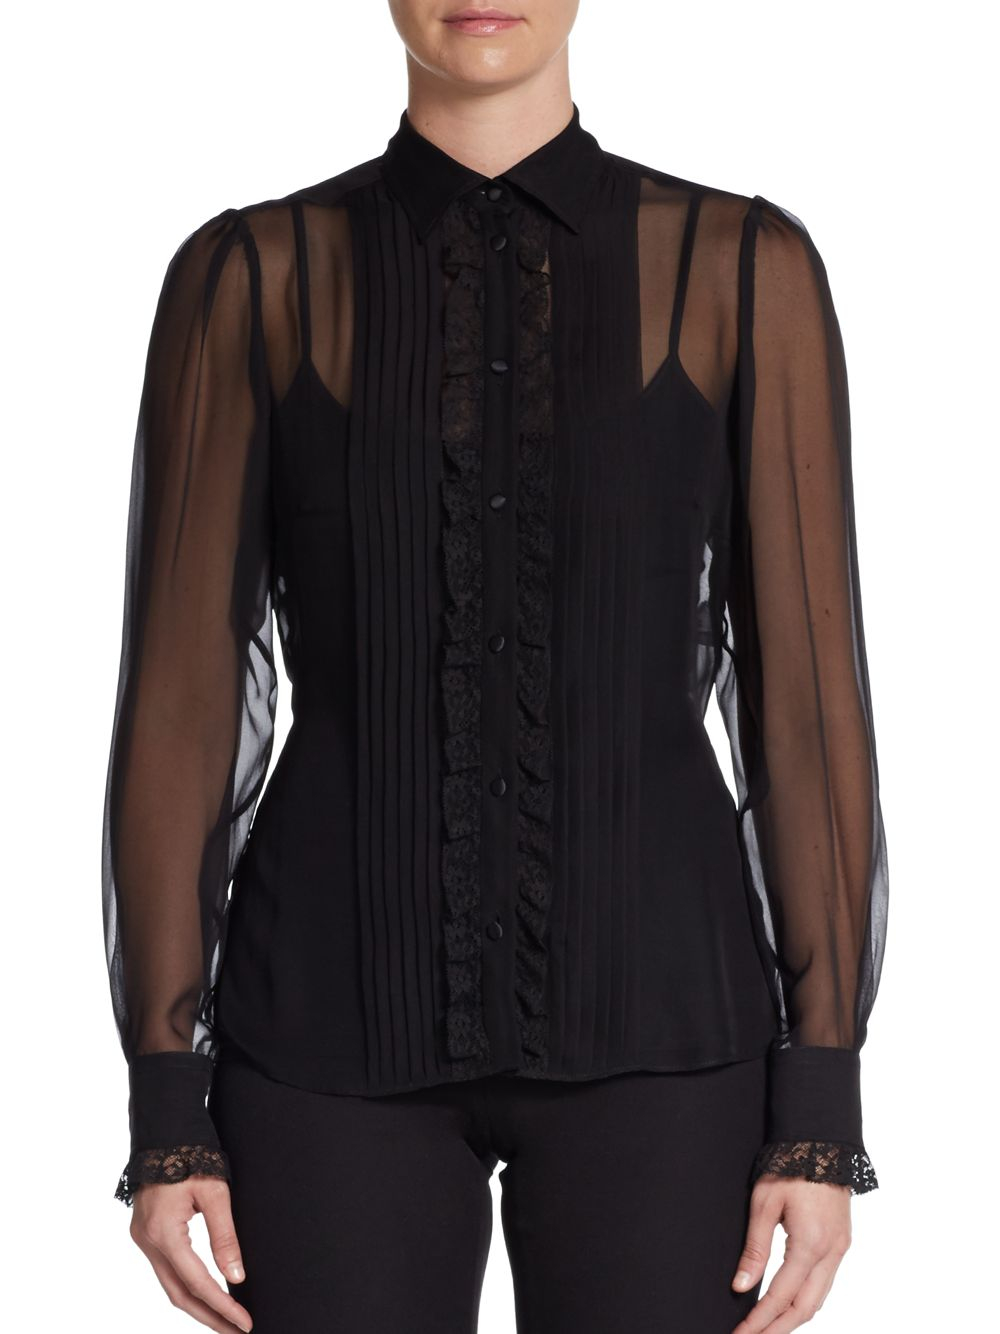 Lyst - Dolce & Gabbana Lace-Trimmed Sheer Silk-Blend Blouse in Black